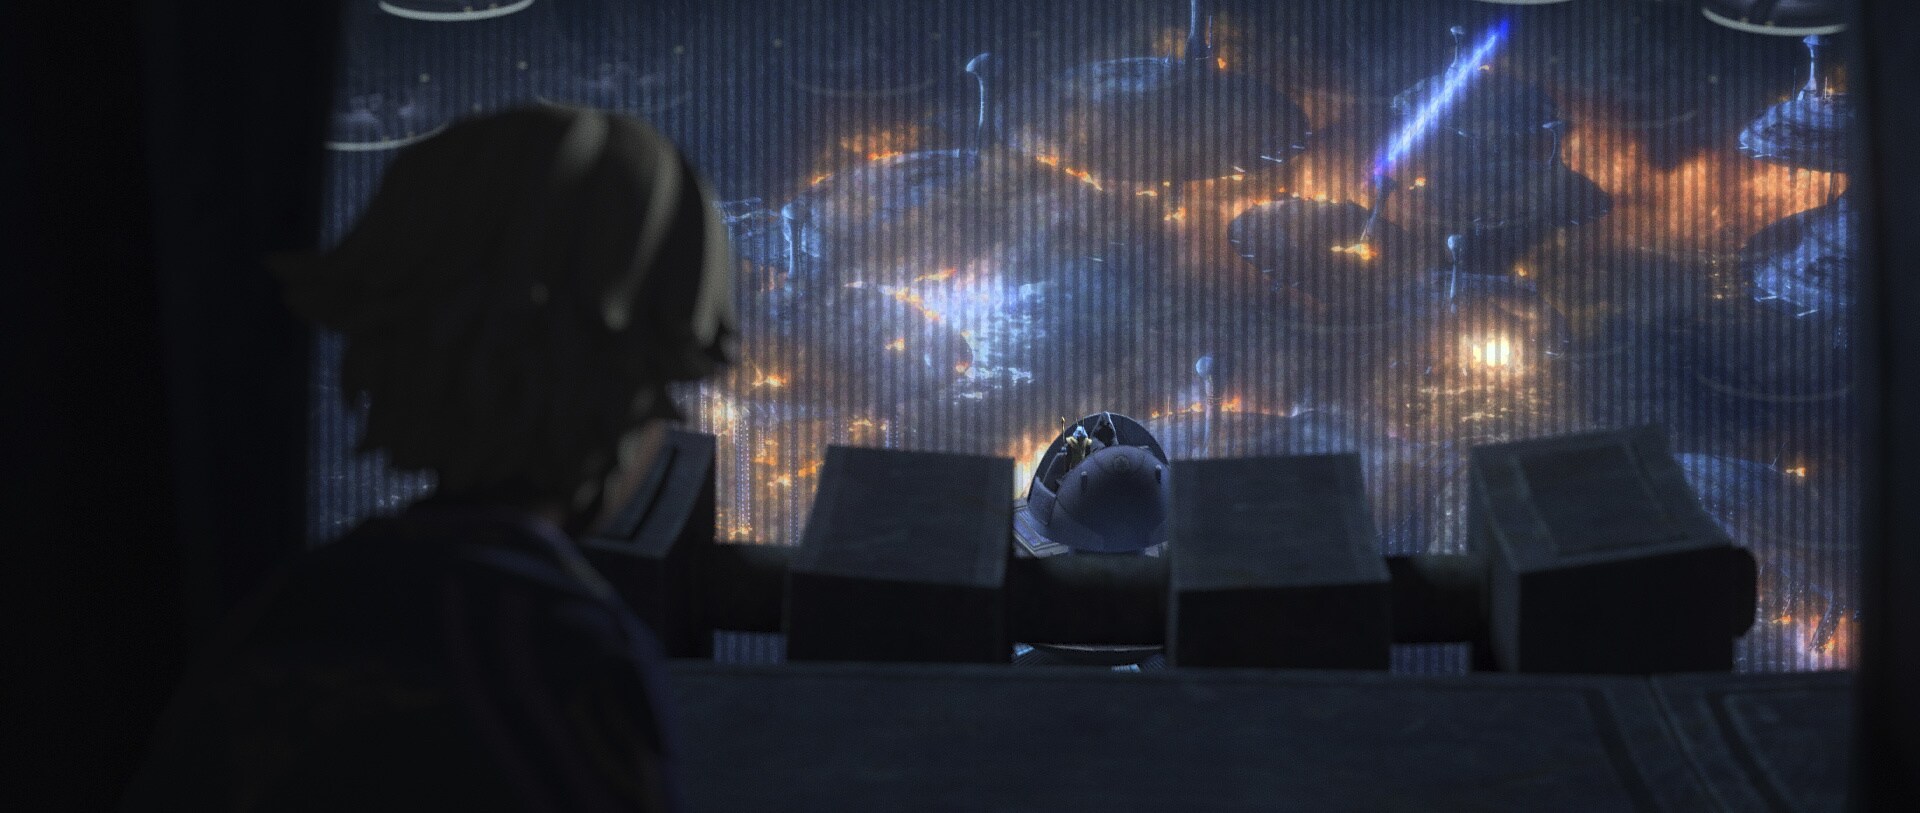 Vice Admiral Rampart’s command logs were eventually recovered by Clone Force 99, proving to the public that the destruction of Kamino was done purposefully, leading to Rampart’s arrest.